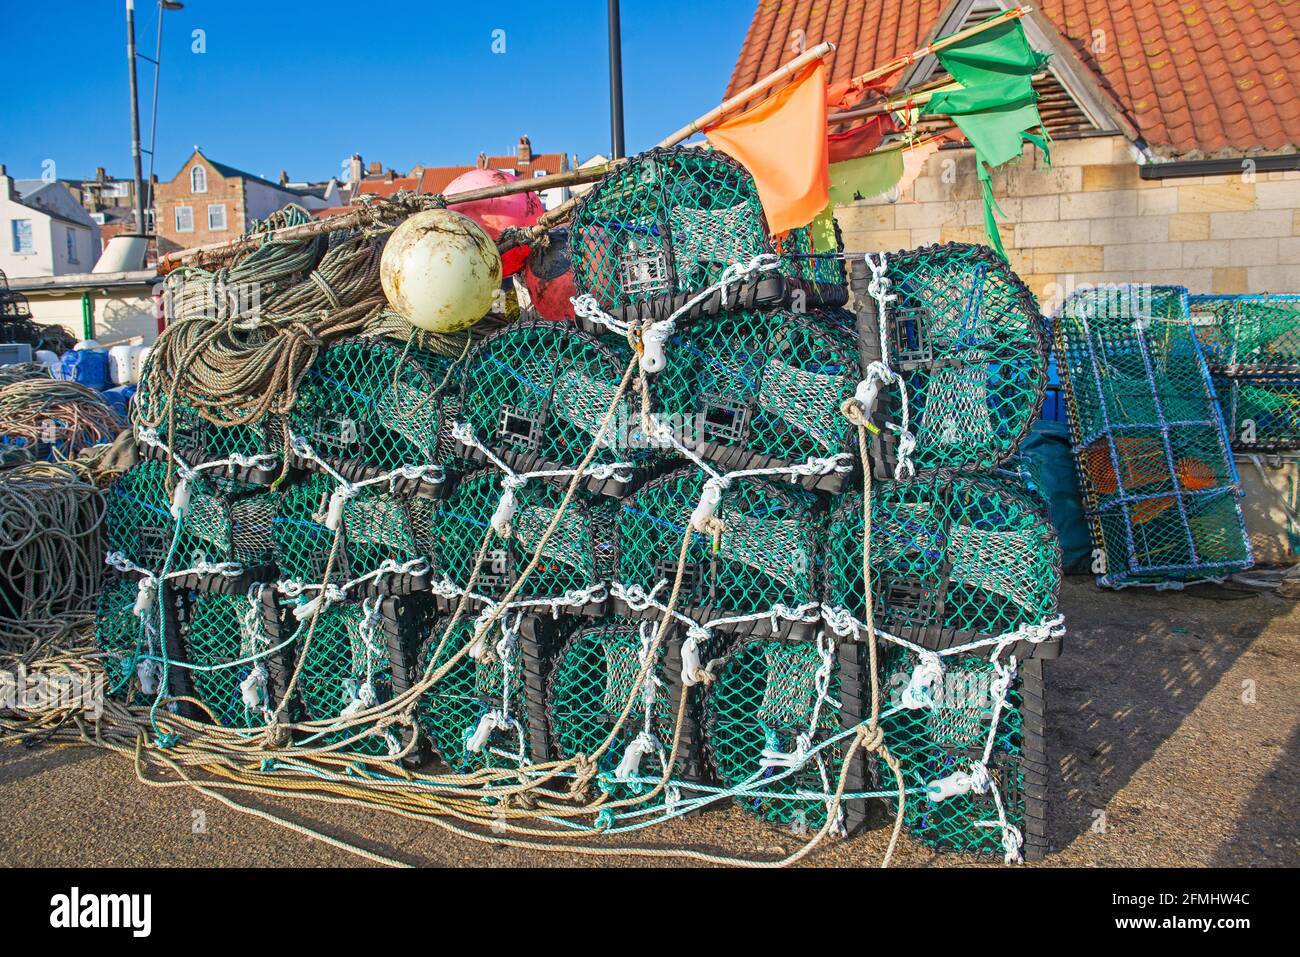 Lobster pots stacked up in a pile on a harbor quayside of fishing port Stock Photo